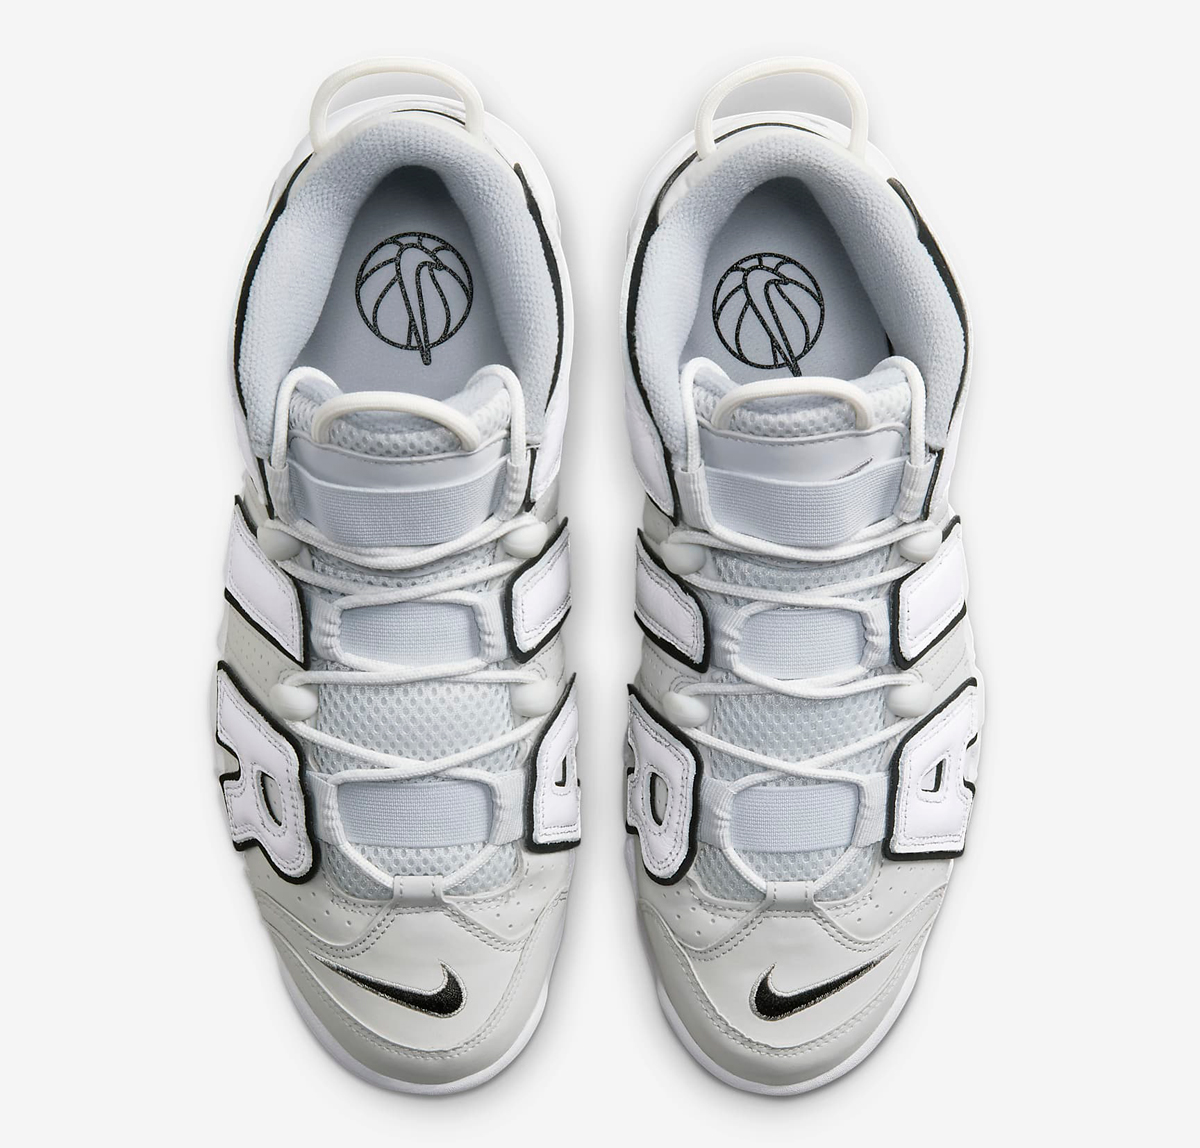 Nike-Air-More-Uptempo-96-Photon-Dust-4